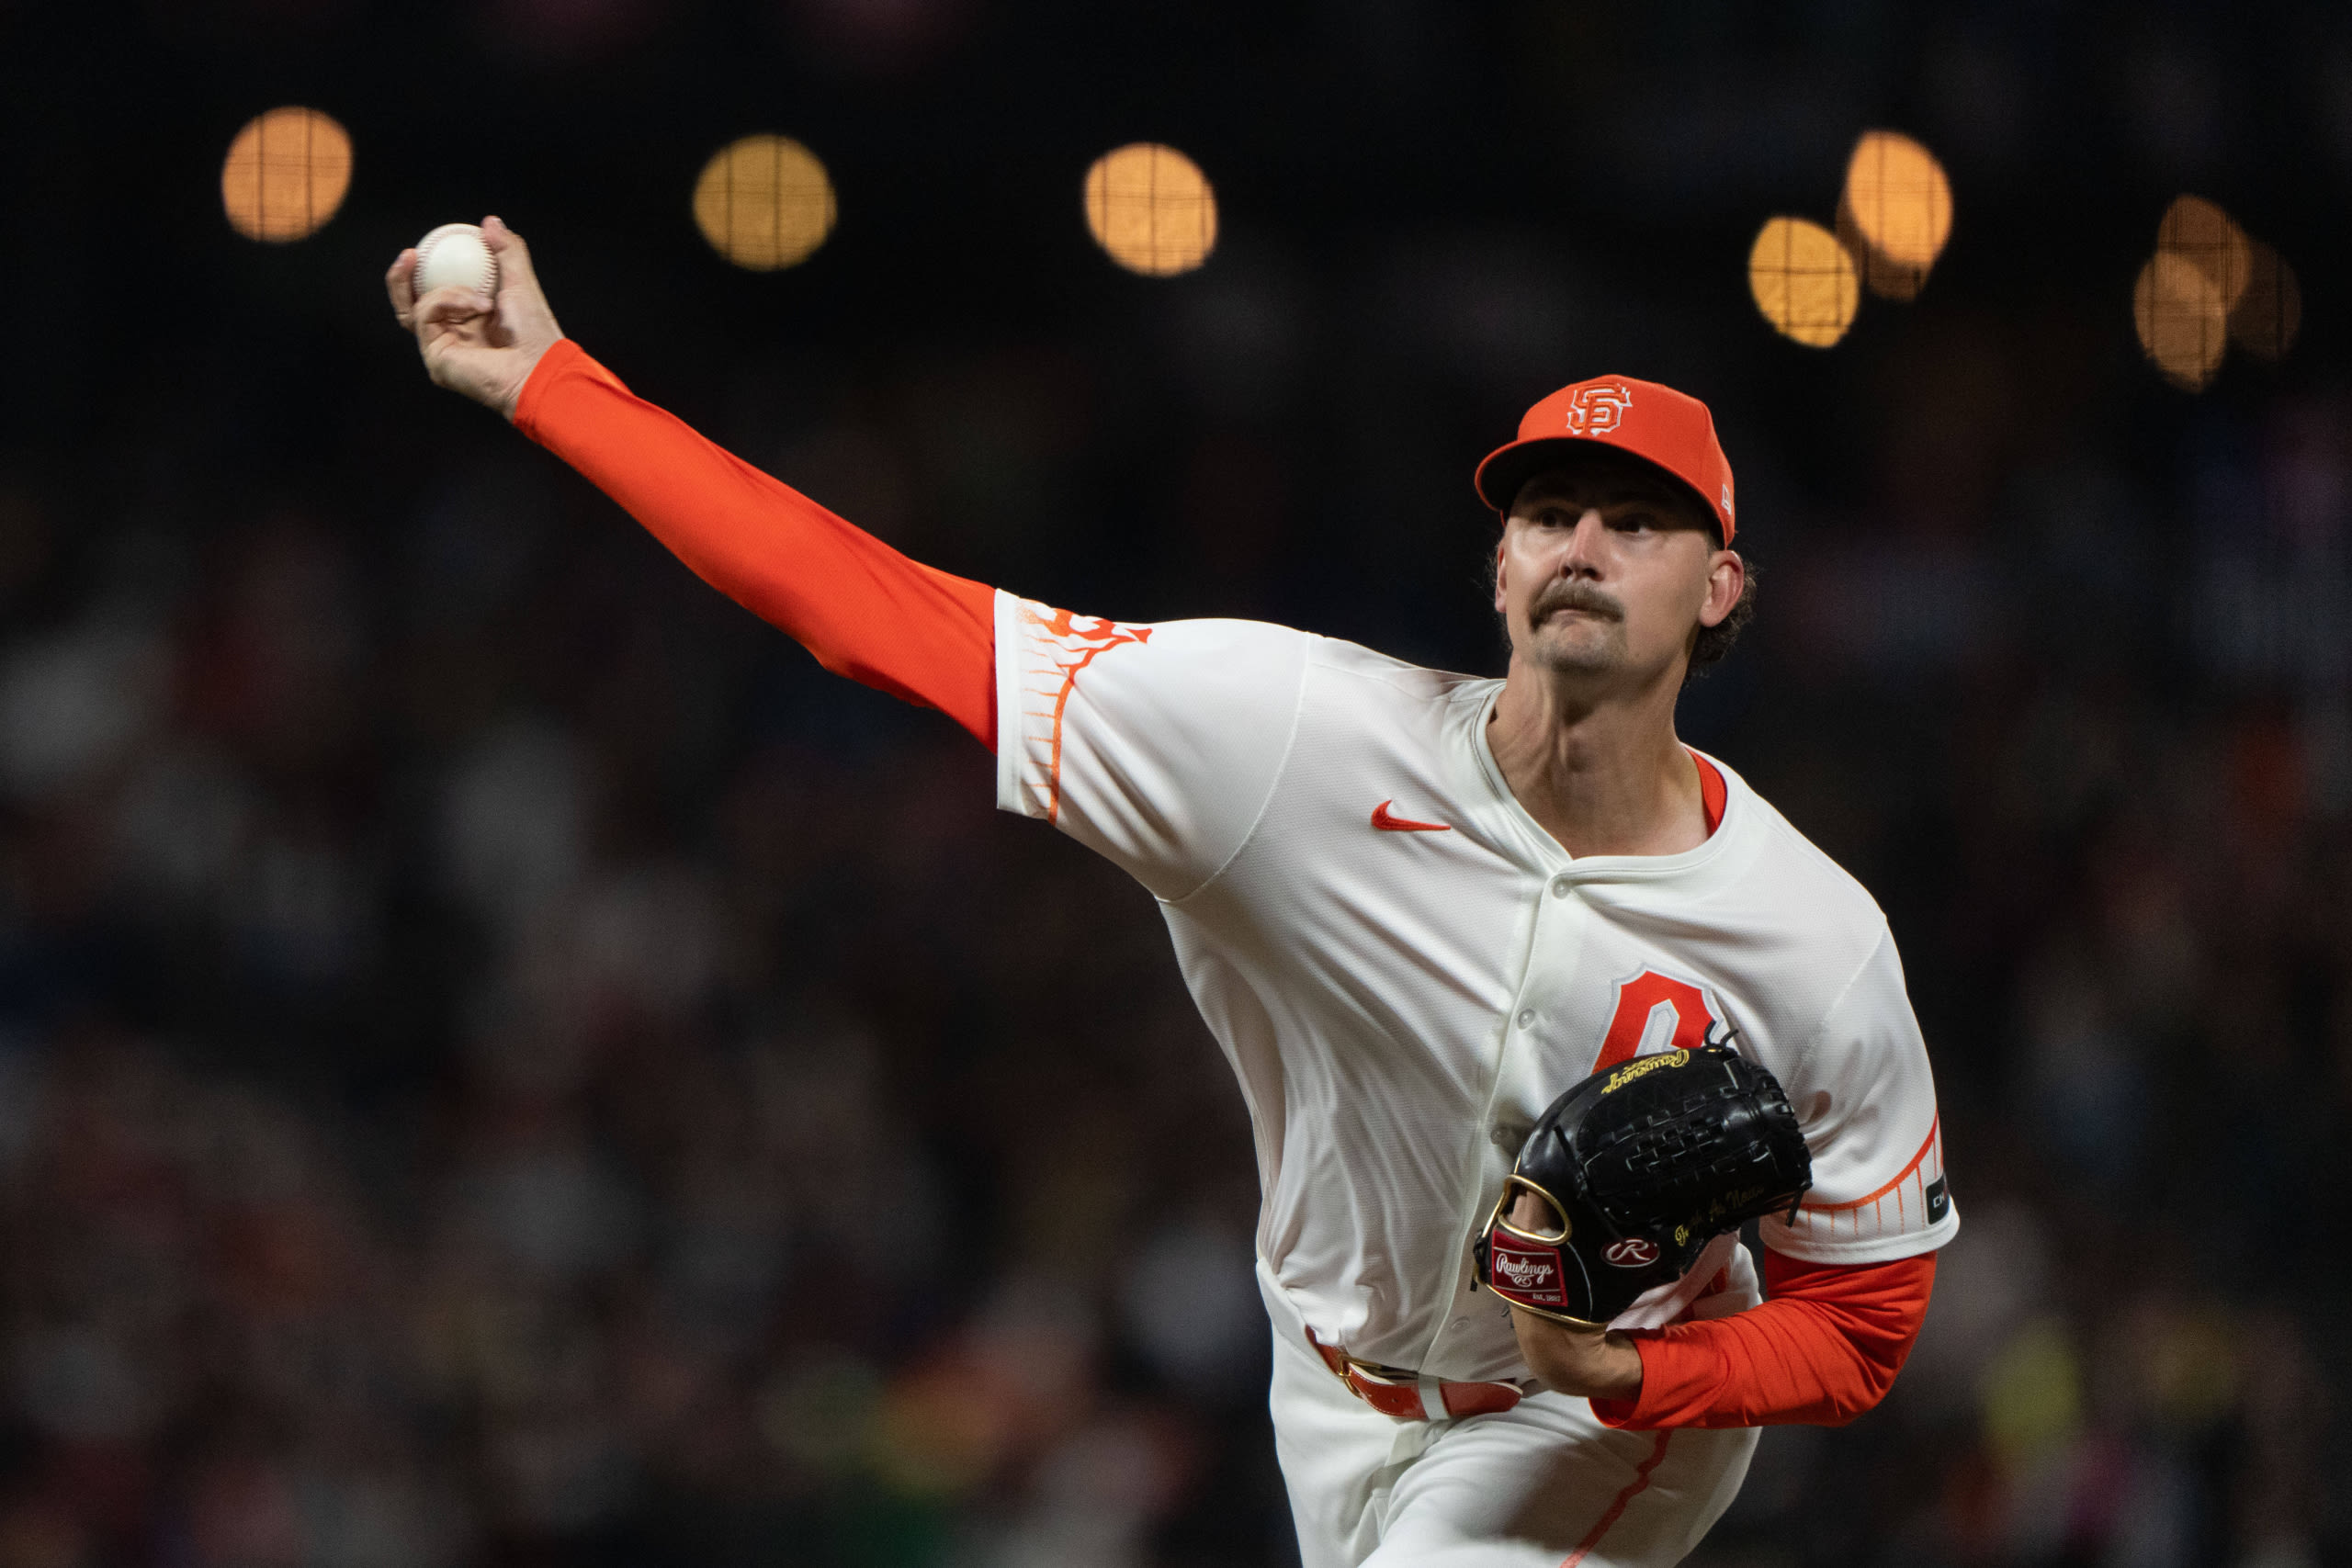 Another series win: Despite loss in finale, Giants keep momentum with series victory over Phillies